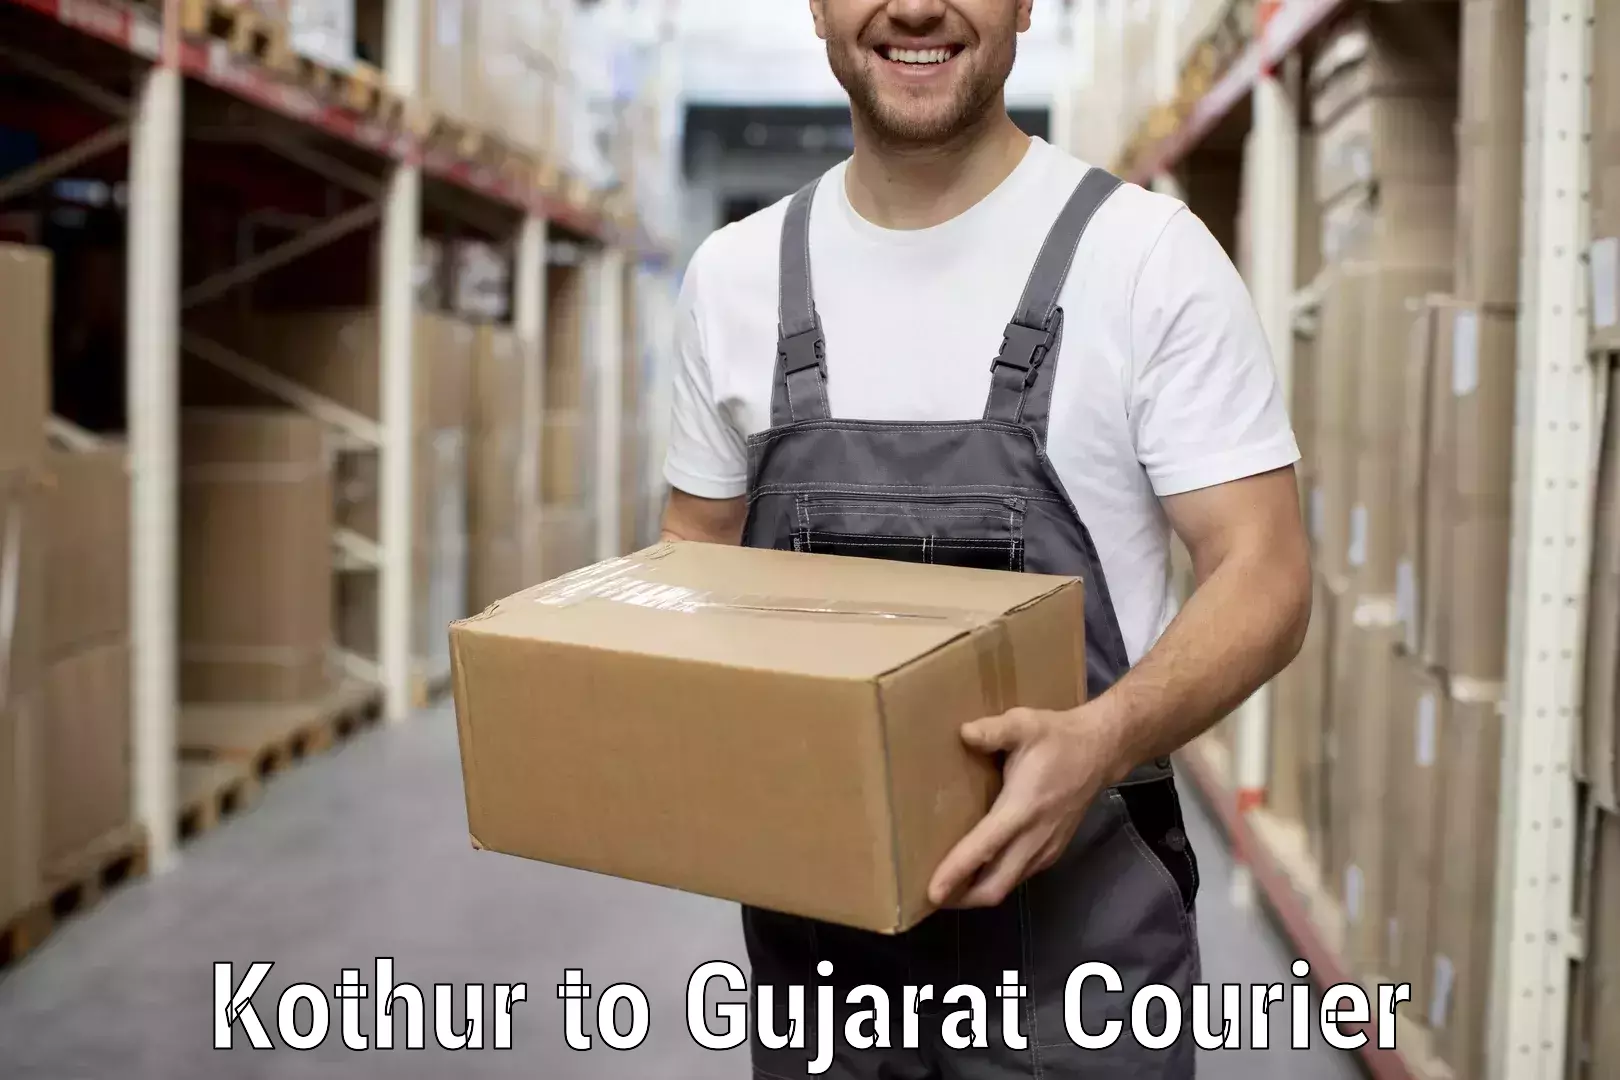 Furniture delivery service Kothur to Mehsana